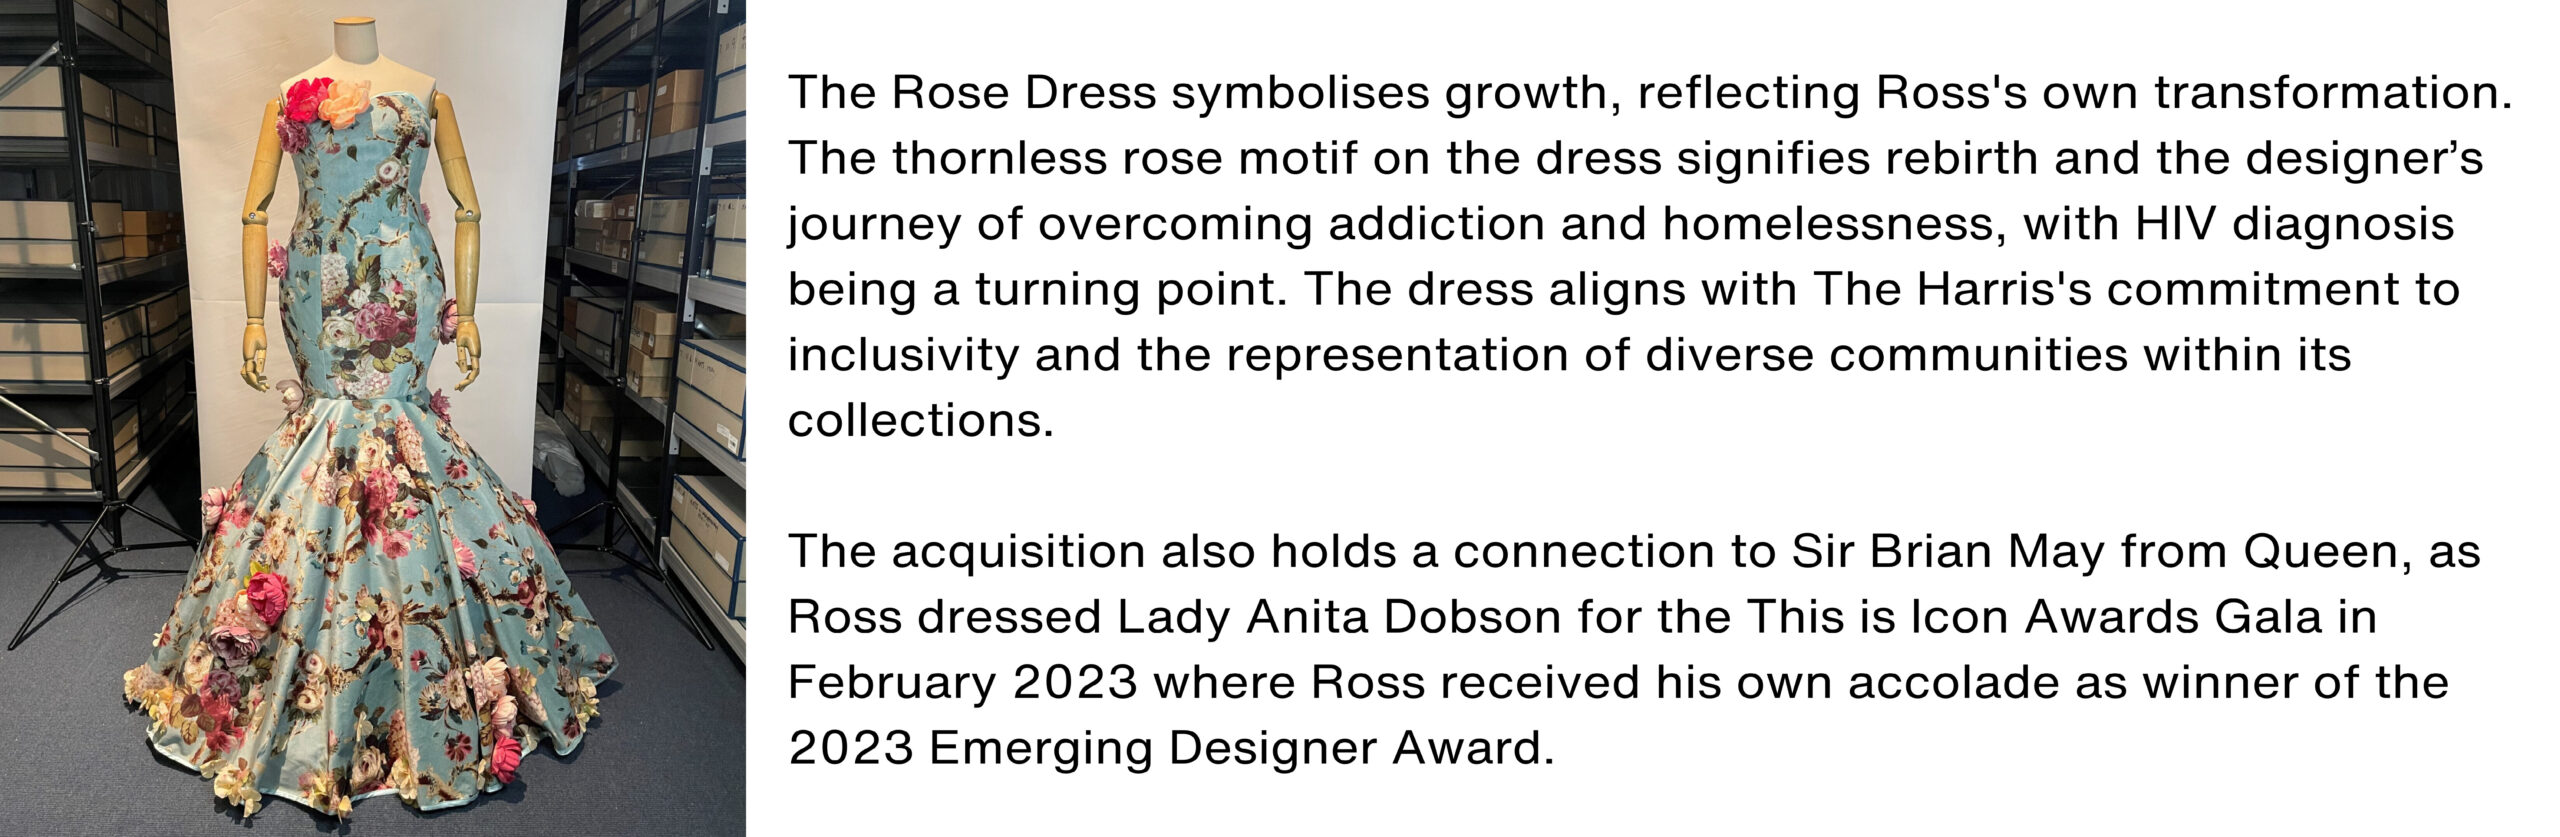 A blue dress with roses accompanied by the following text: The Rose Dress symbolises growth, reflecting Ross's own transformation. The thornless rose motif on the dress signifies rebirth and the designer’s journey of overcoming addiction and homelessness, with HIV diagnosis being a turning point. The dress aligns with The Harris's commitment to inclusivity and the representation of diverse communities within its collections. The acquisition also holds a connection to Sir Brian May from Queen, as Ross dressed Lady Anita Dobson for the This is Icon Awards Gala in February 2023 where Ross received his own accolade as winner of the 2023 Emerging Designer Award.